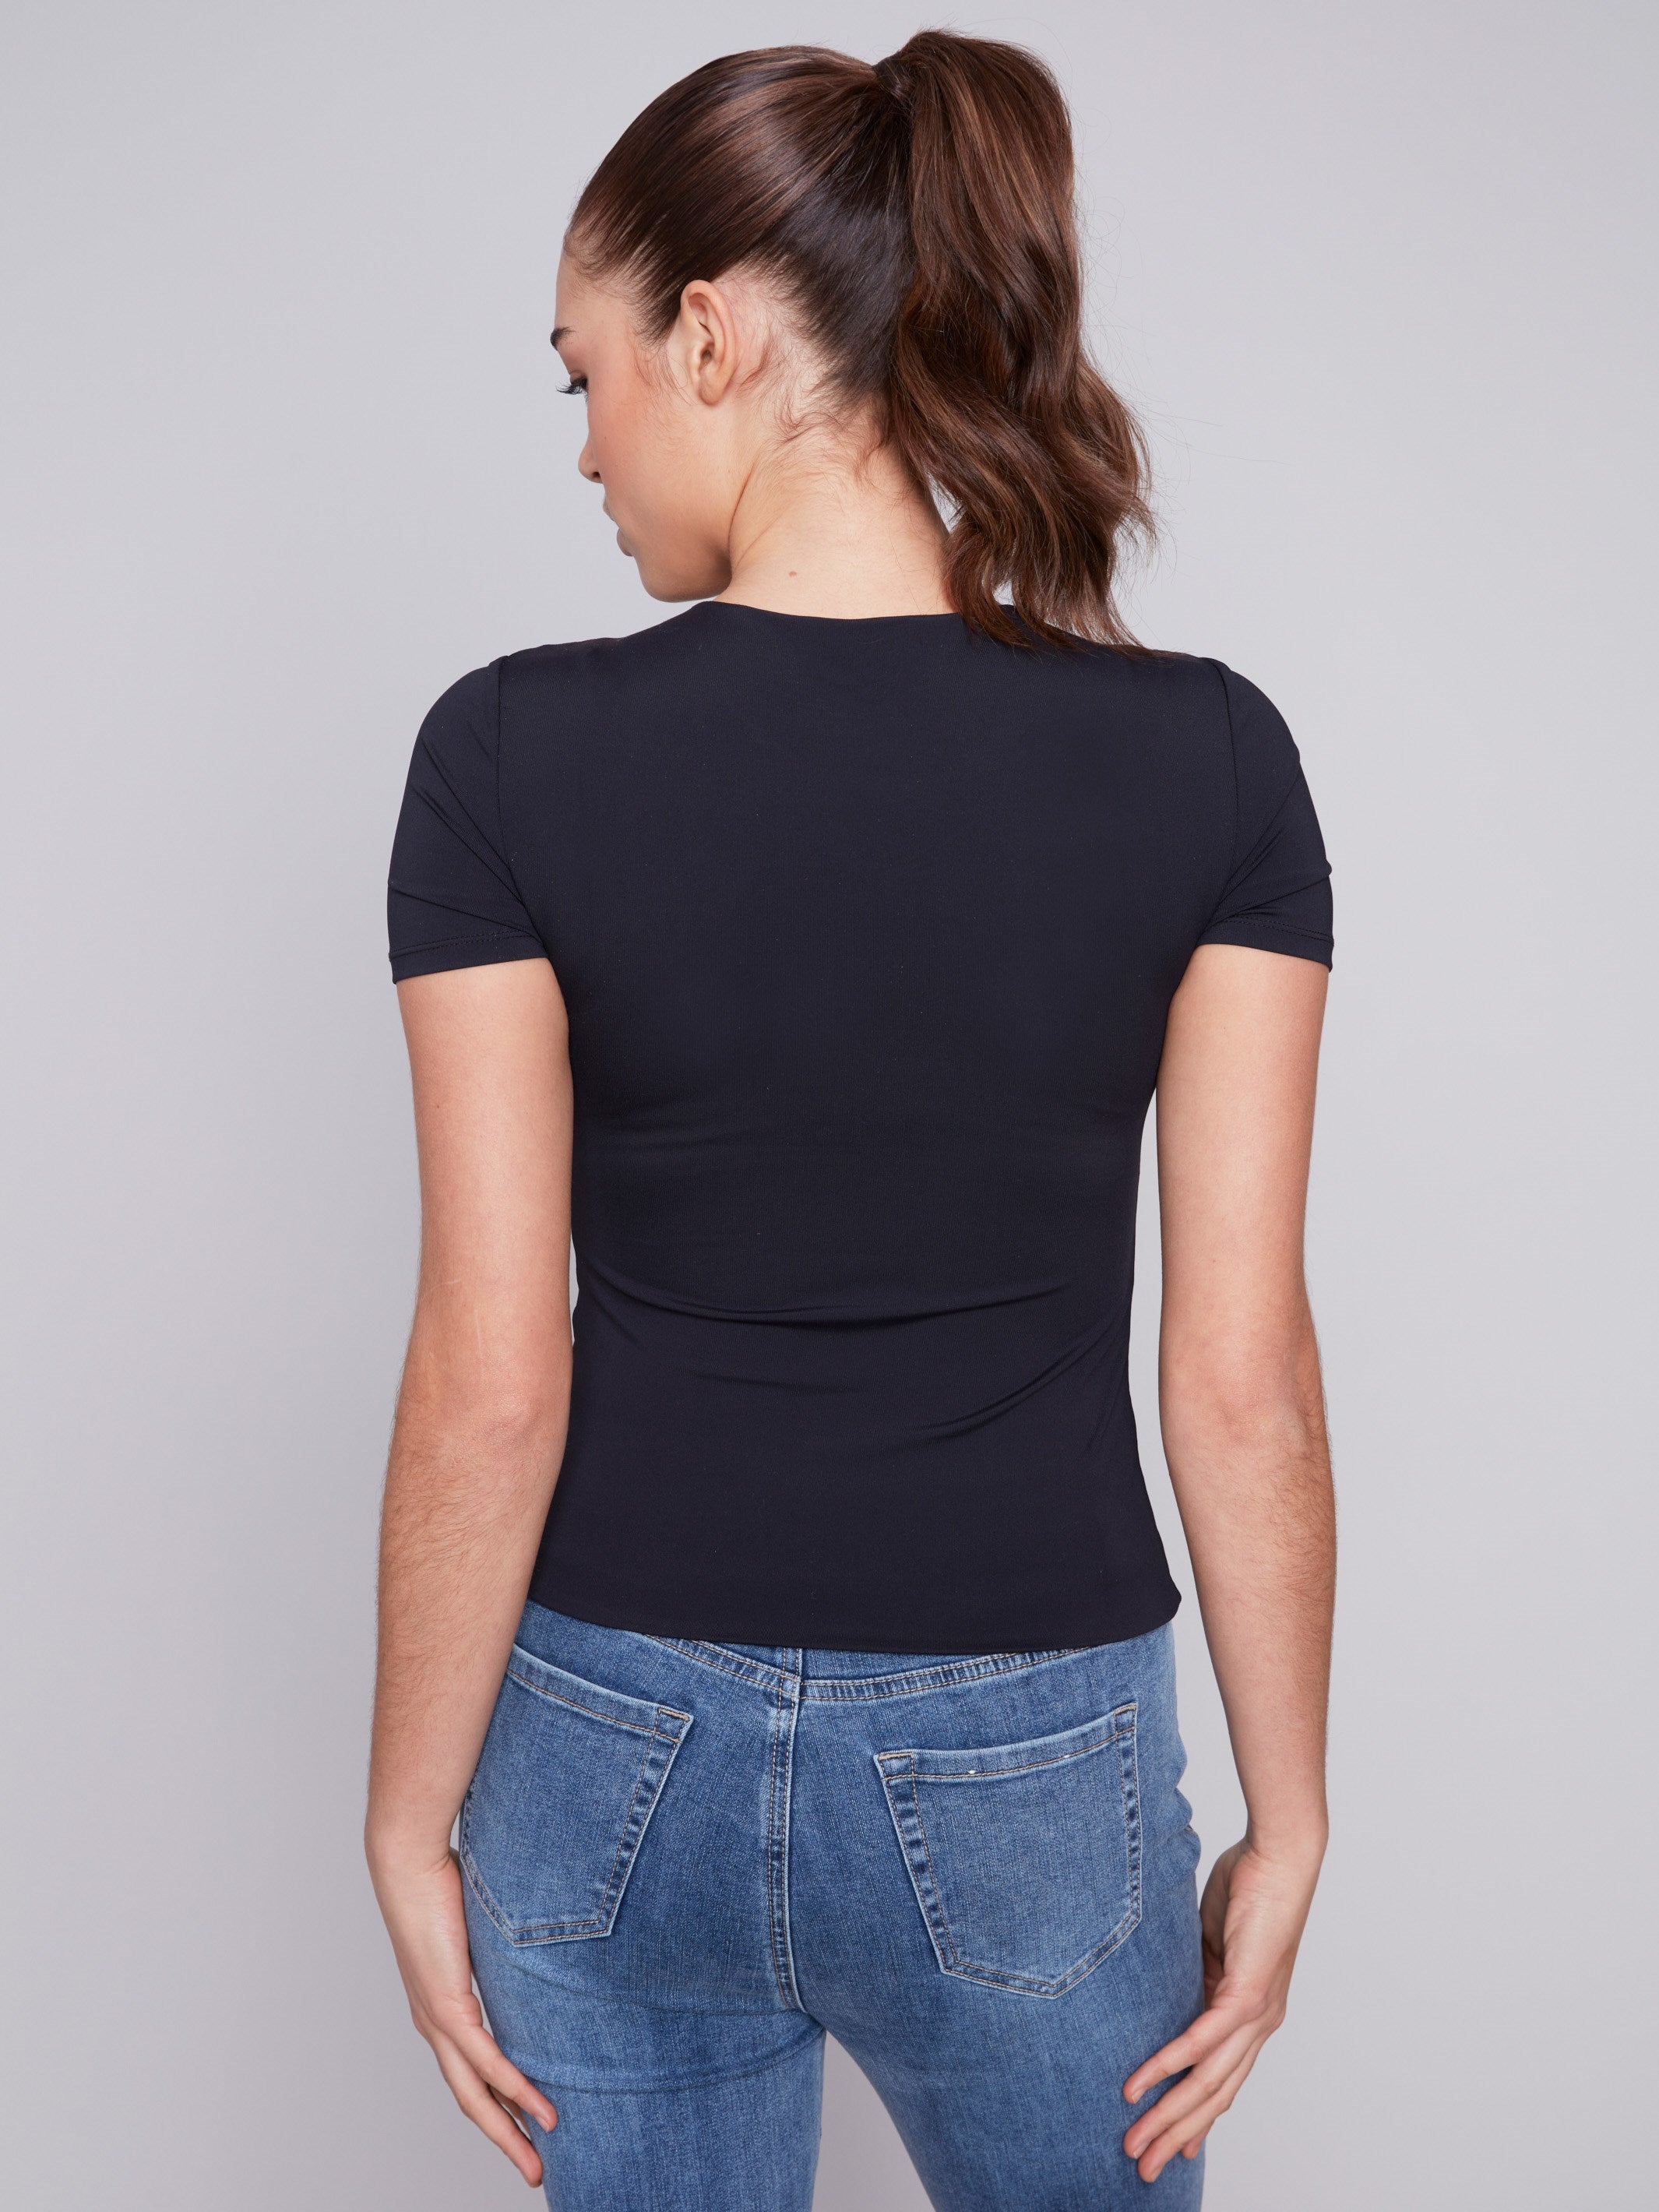 Short-Sleeved Super Stretch Top - Black - Charlie B Collection Canada - Image 2